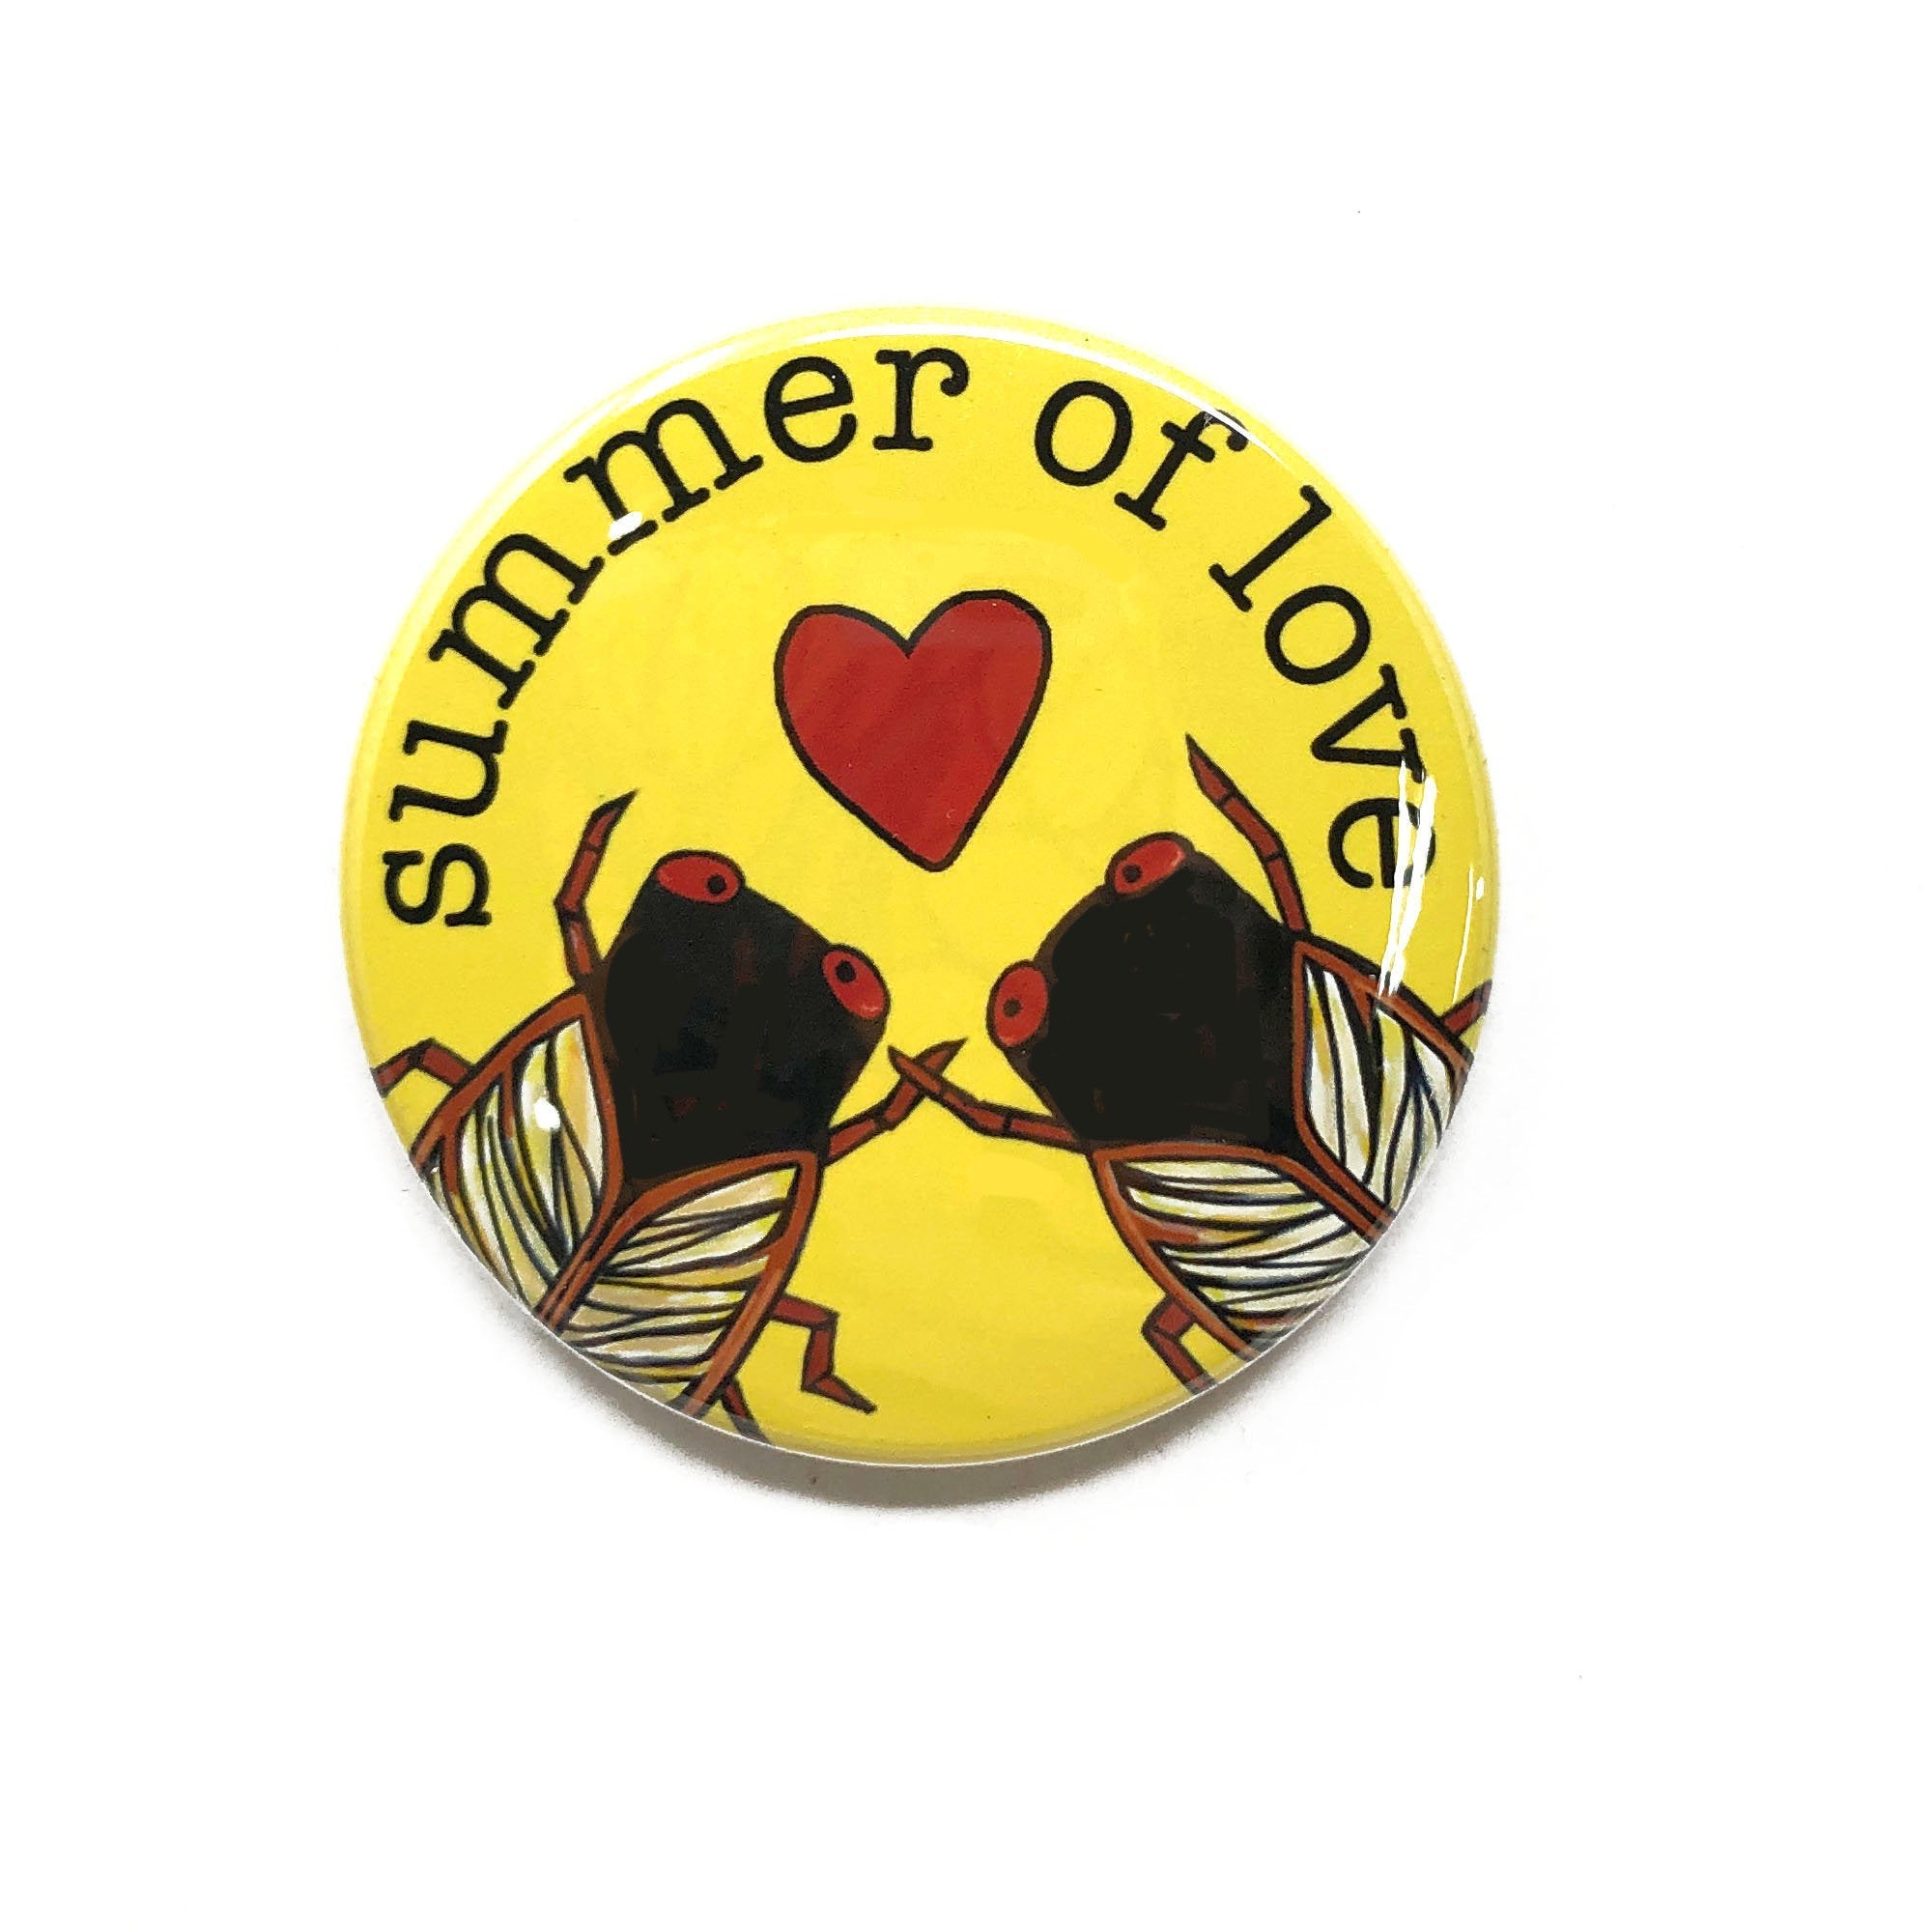 Cicada Summer of Love Pin, Magnet, or Pocket Mirror - Funny Brood X Pinback Button or Fridge Magnet - Insect